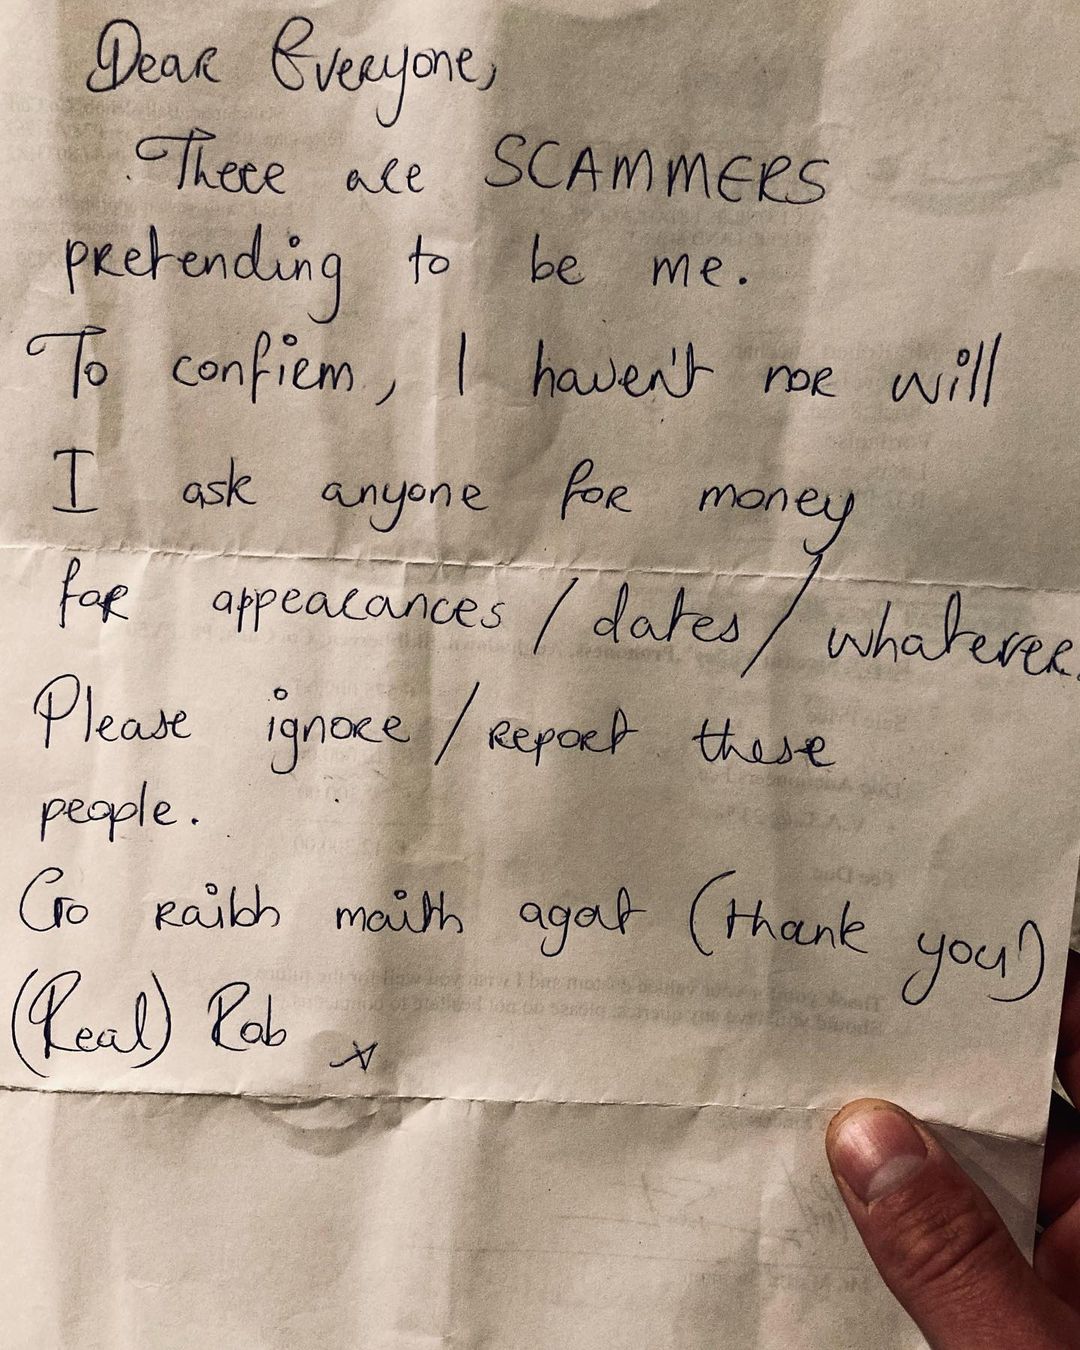 Robert Sheehan wrote a handwritten note to make people aware of scammers and their scams.